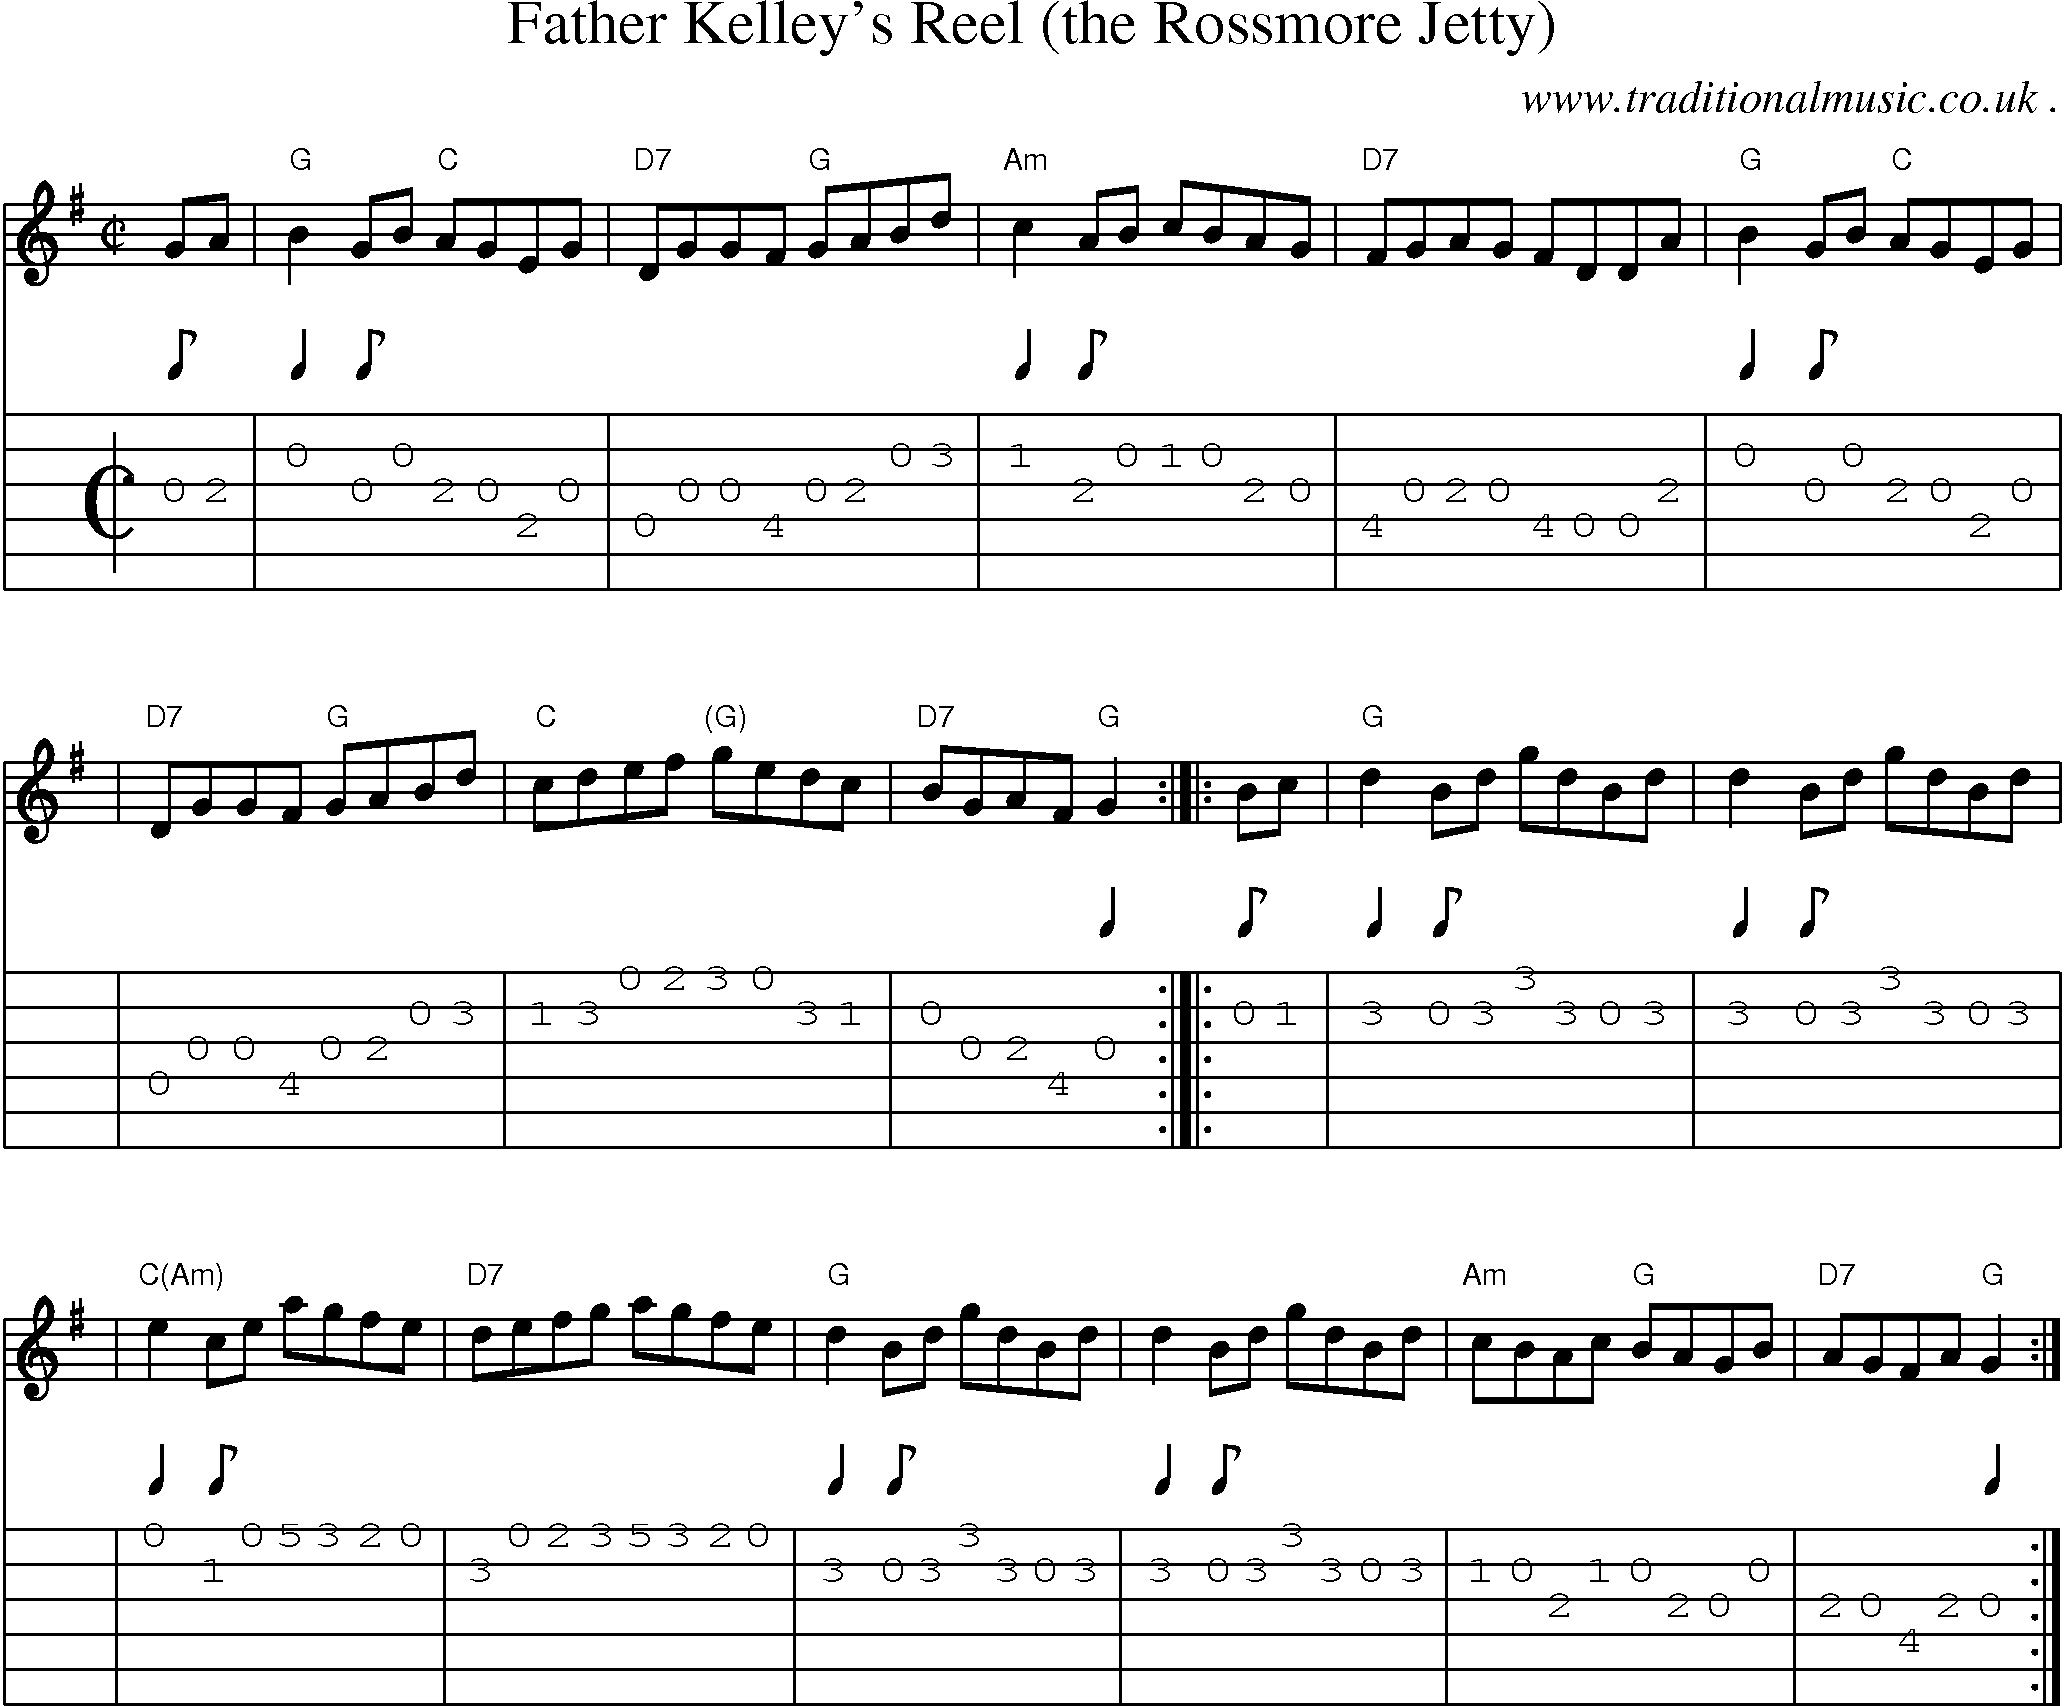 Sheet-music  score, Chords and Guitar Tabs for Father Kelleys Reel The Rossmore Jetty